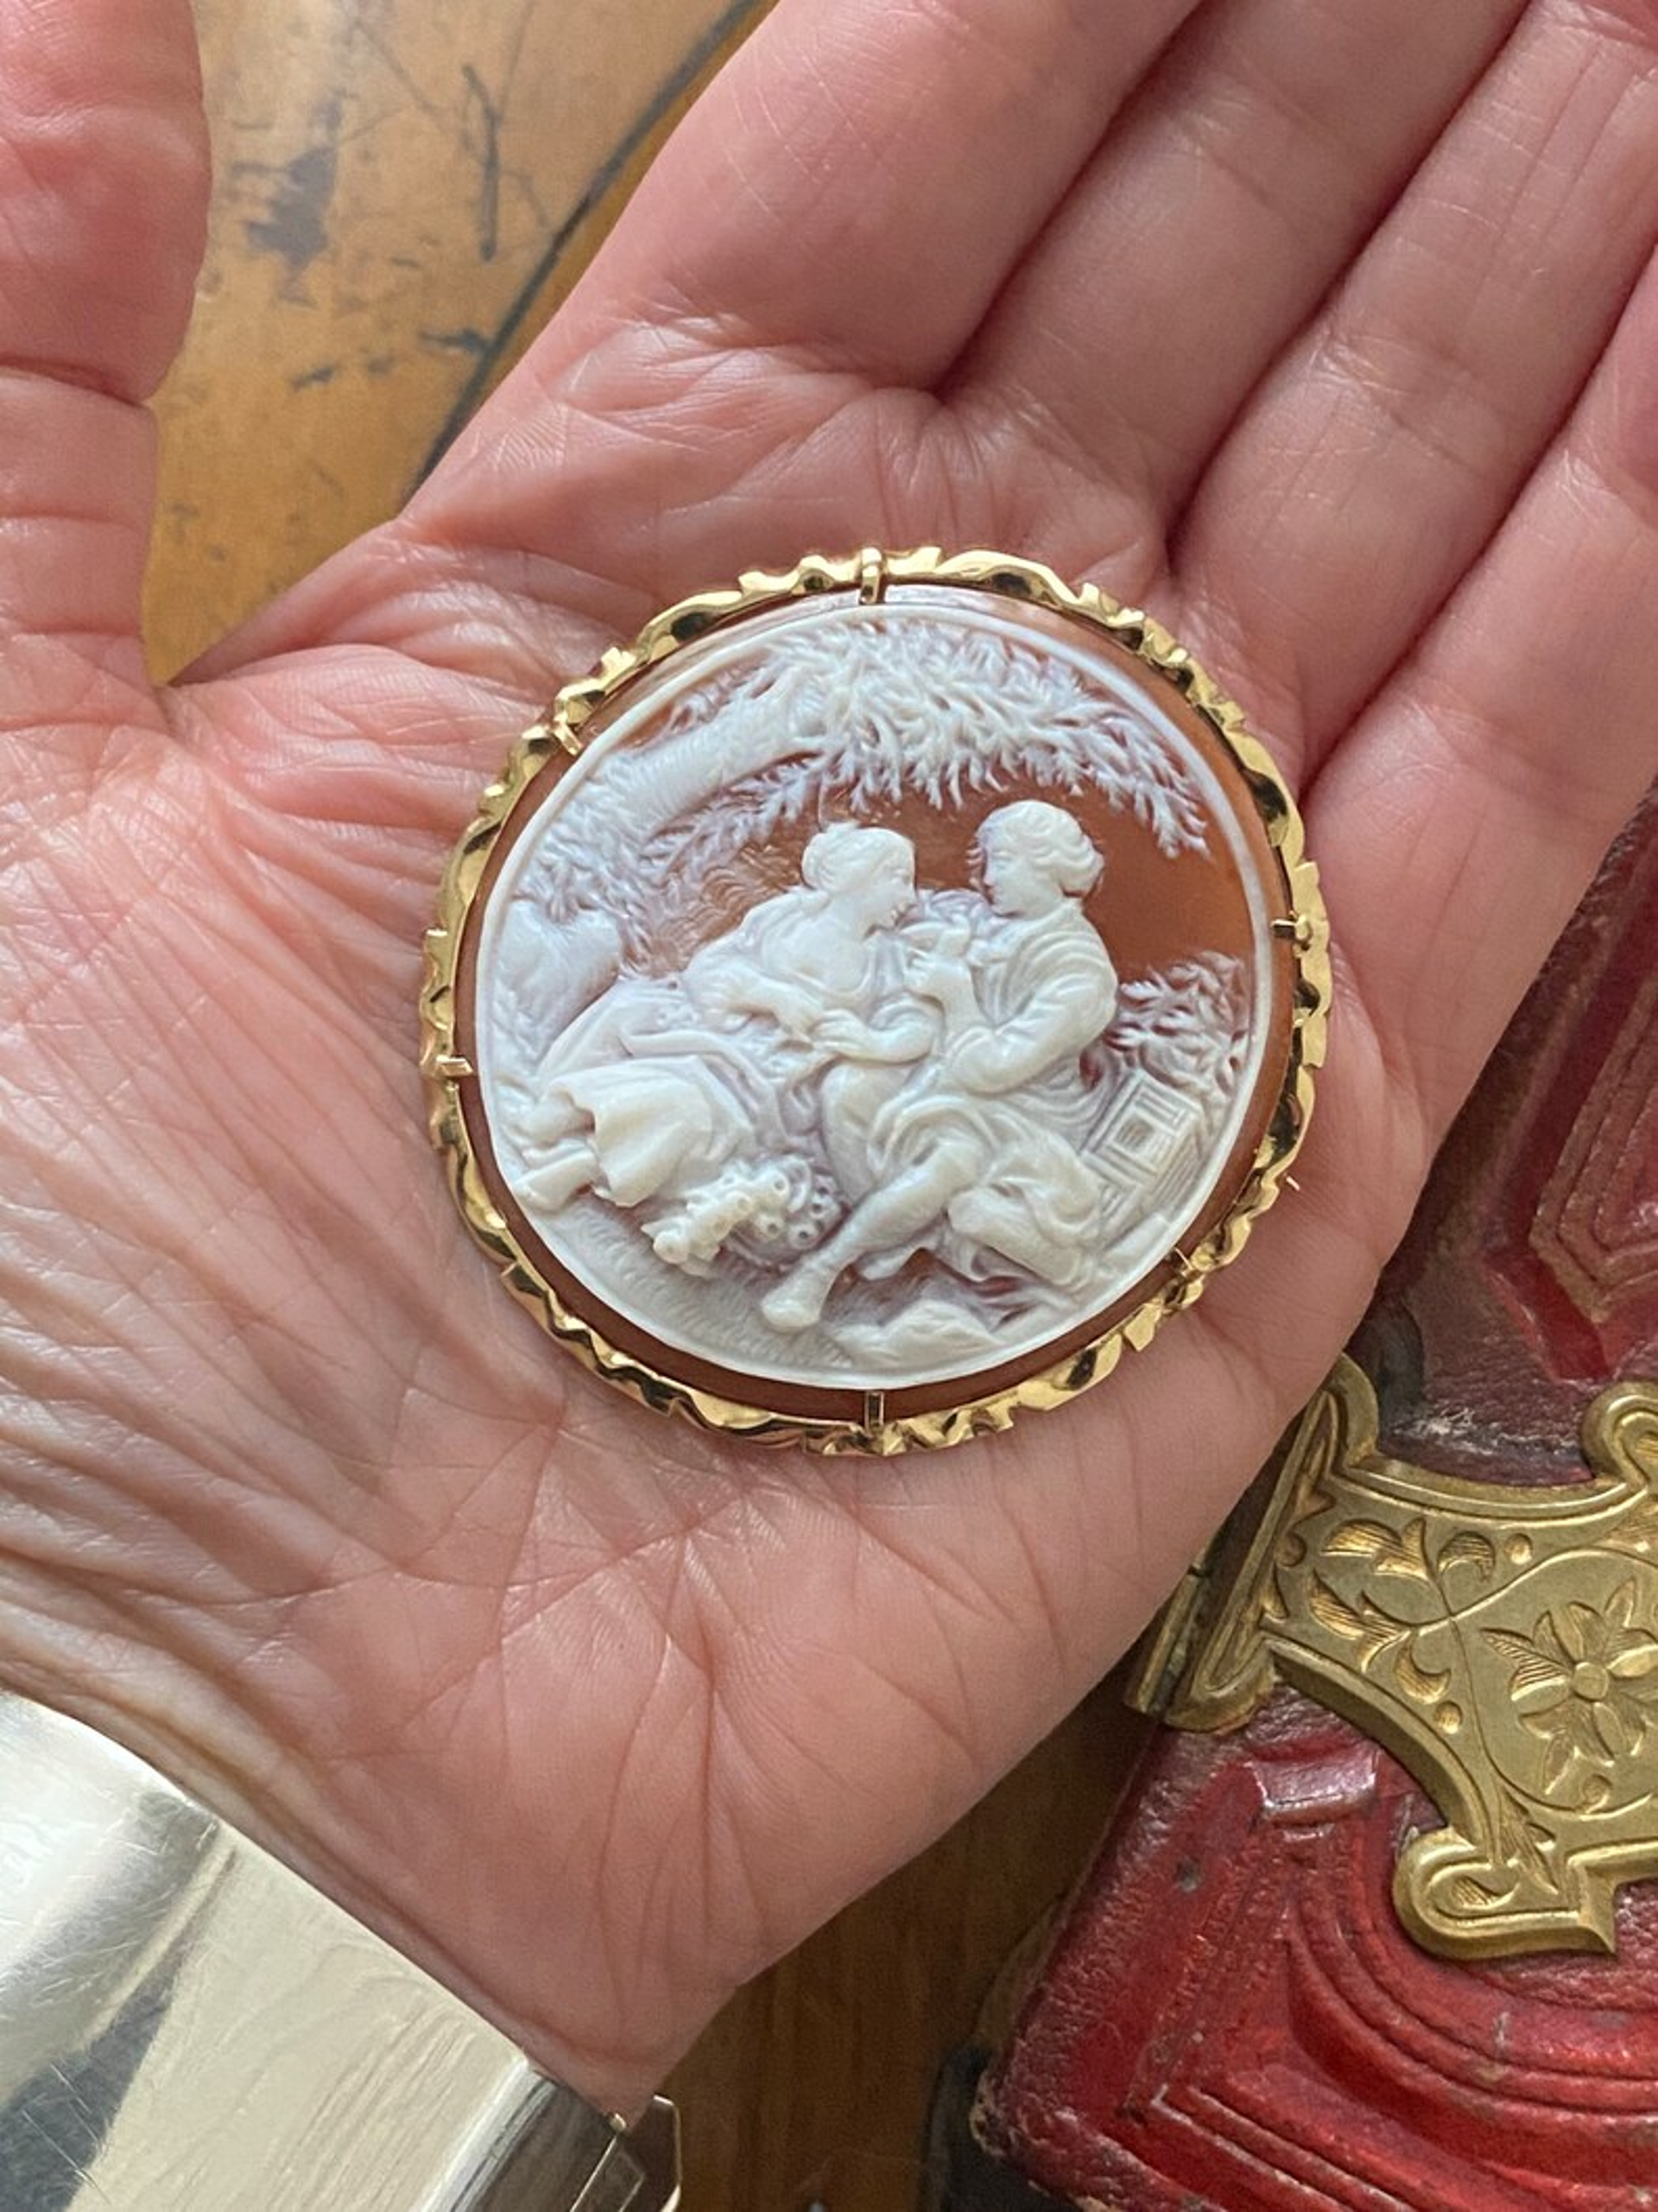 Sweetheart courting scene carved Italian shell cameo necklace pendant combined brooch/pin, 14ct gold, signed by Cameo